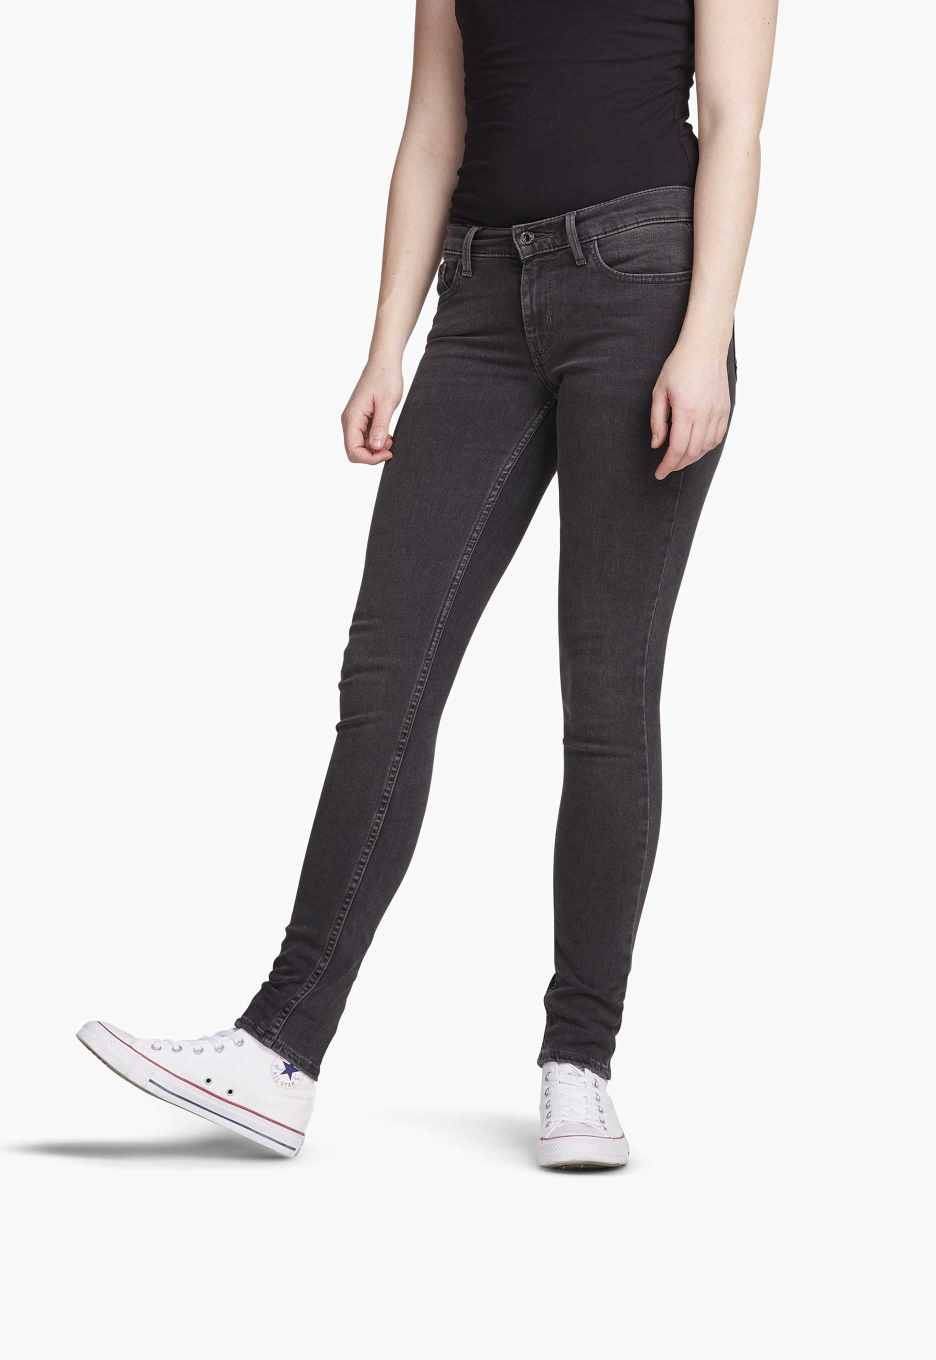 Concreet verpleegster versnelling LEVI'S 710 Mid Rise Super Skinny Jeans | OPEN32.nl